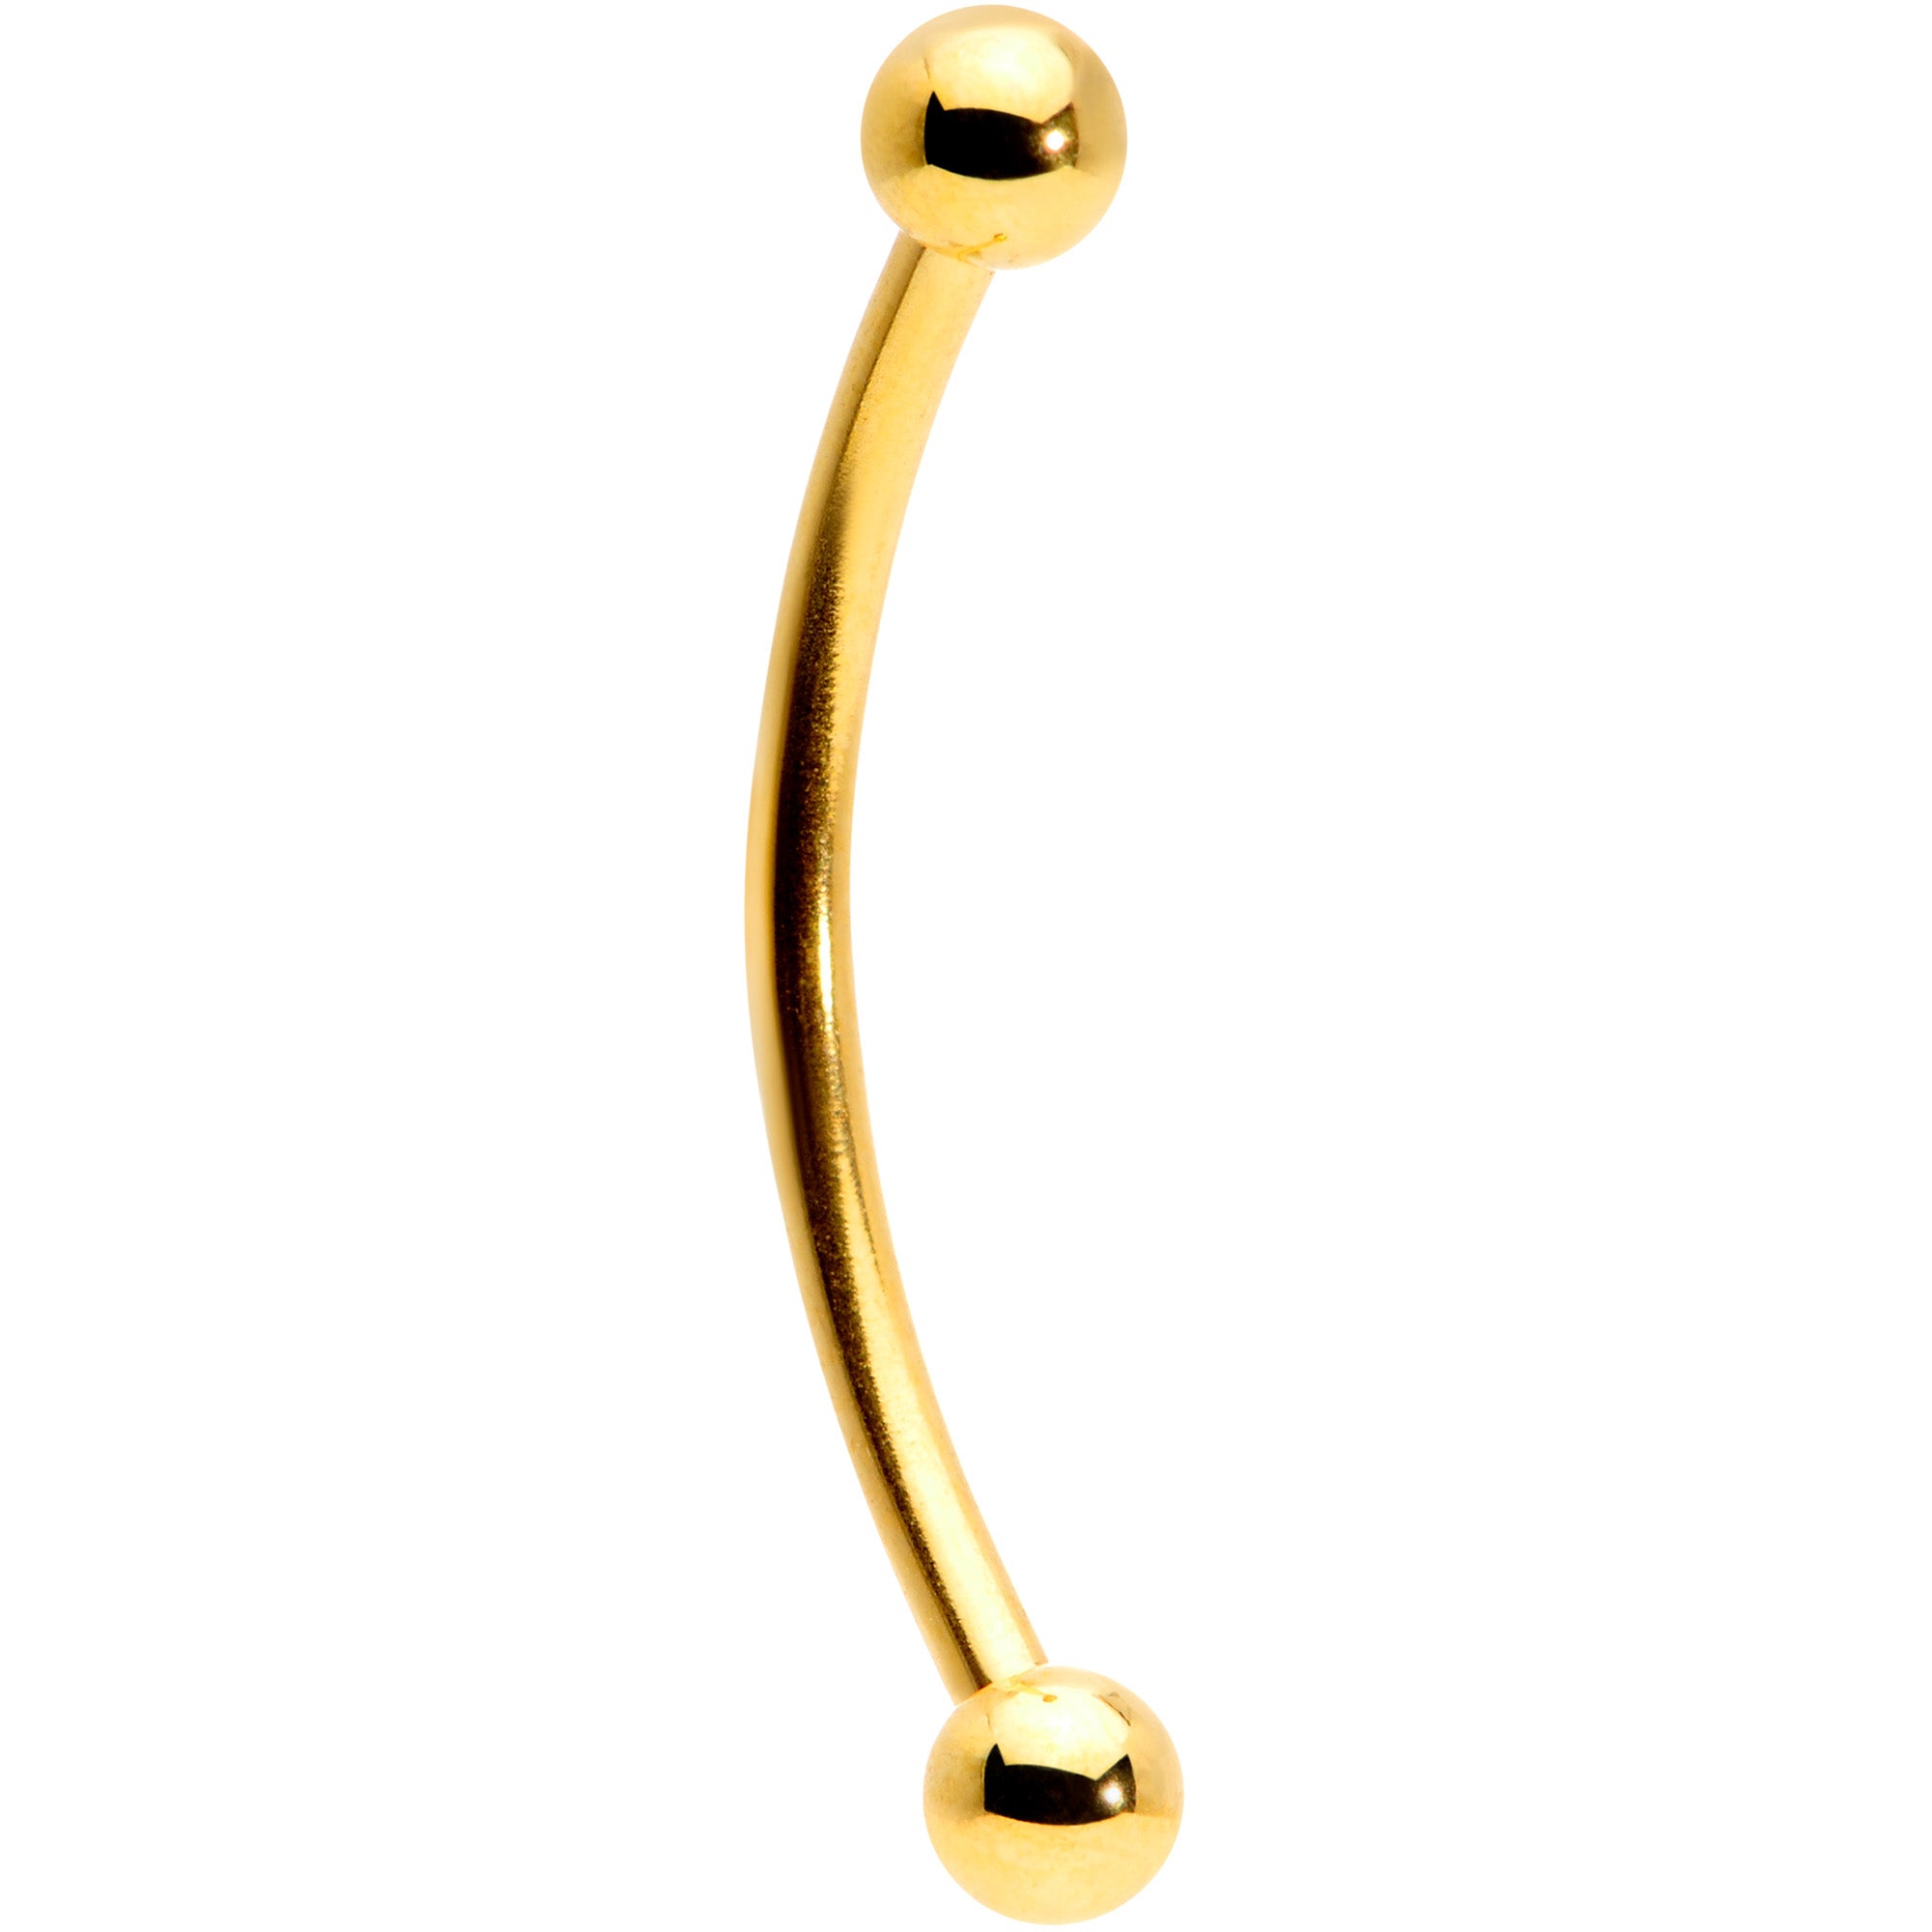 16 Gauge 5/8 Gold Tone Curved Barbell